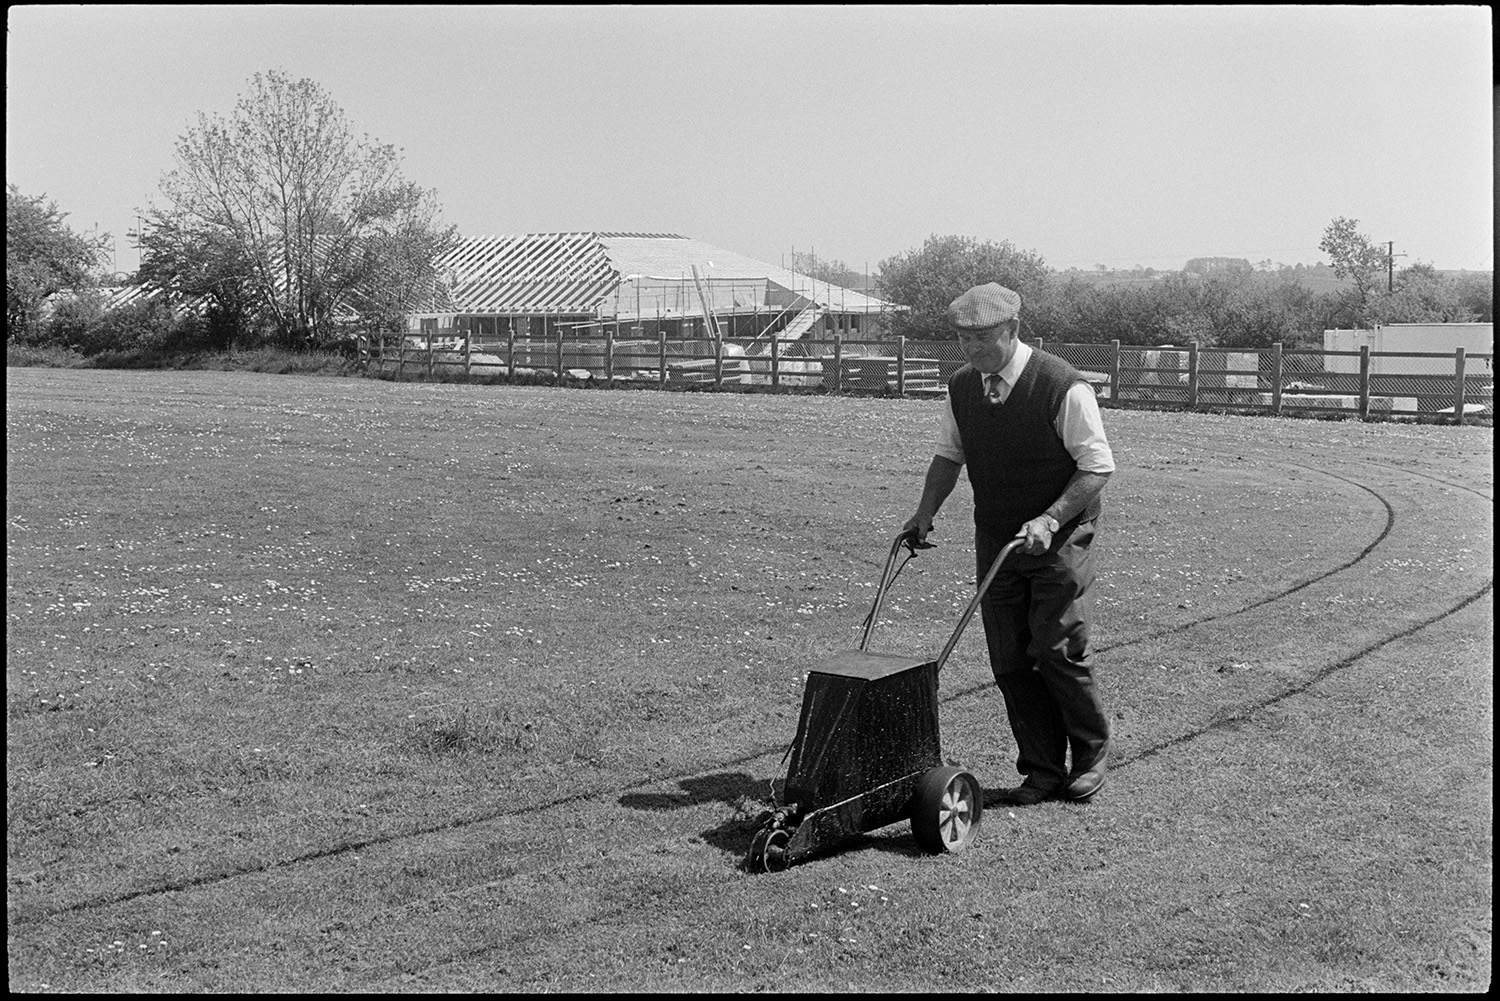 Man marking out school sports field.
[A groundsman marking a track around the edge of Chulmleigh Primary School sports field, pushing an line marking machine. In the background can be seen the construction of the new school building.]